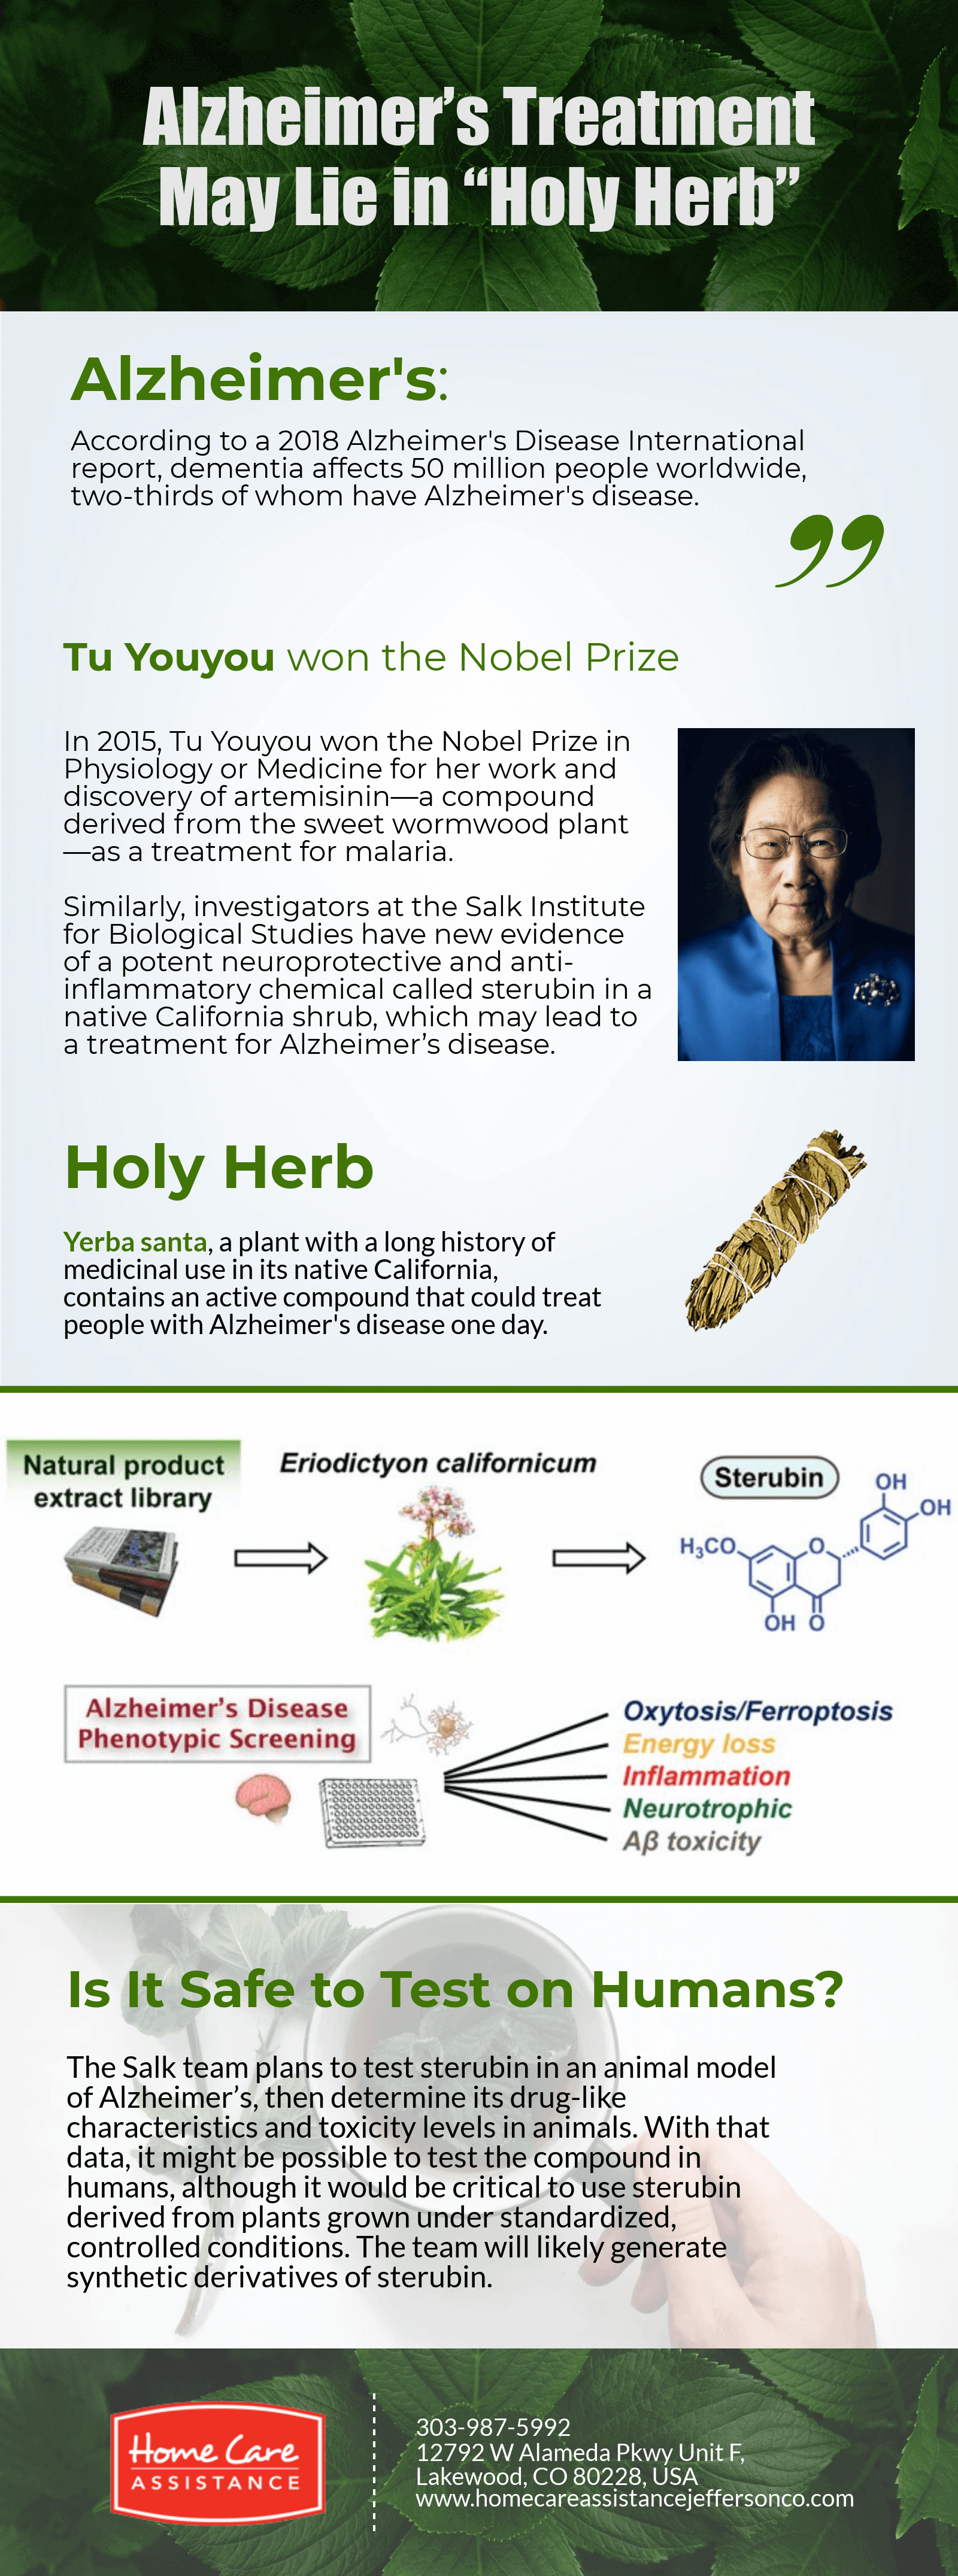 Alzheimer’s Treatment May Lie in “Holy Herb” [Infographic]